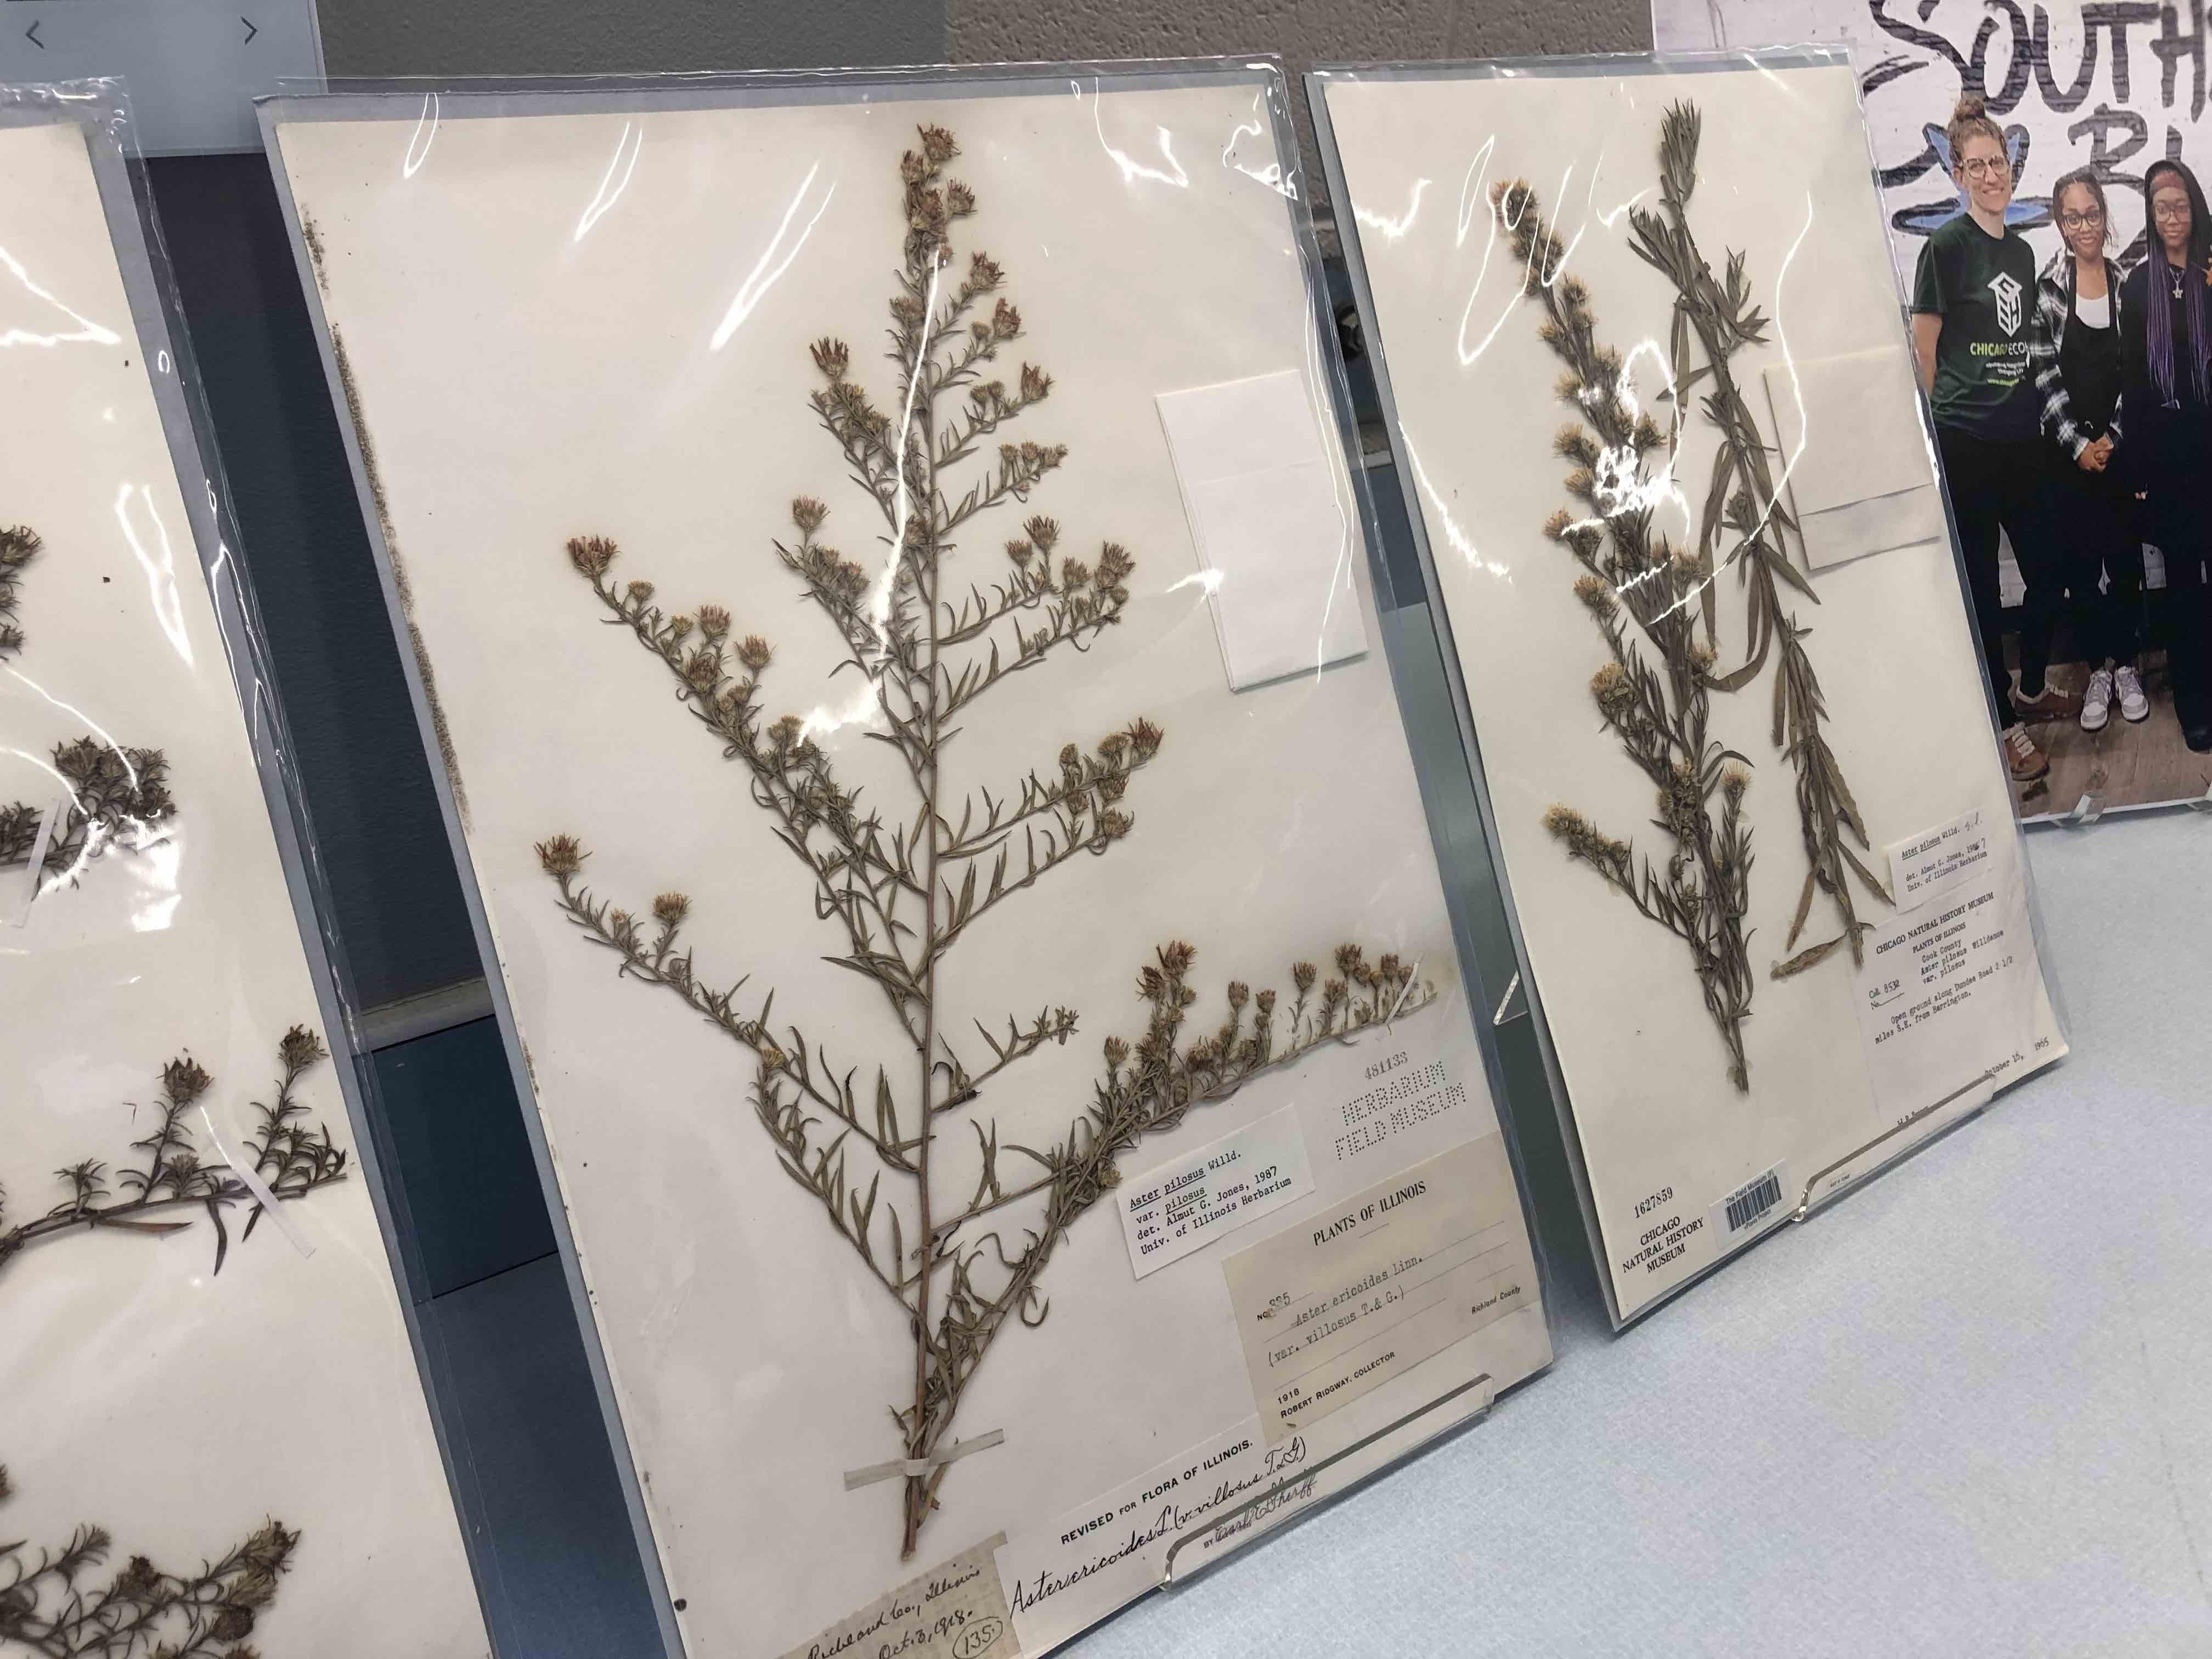 Pressed flower specimens from the Field’s collection that correspond to the ones in the Southside Blooms bouquet. (Patty Wetli / WTTW News)